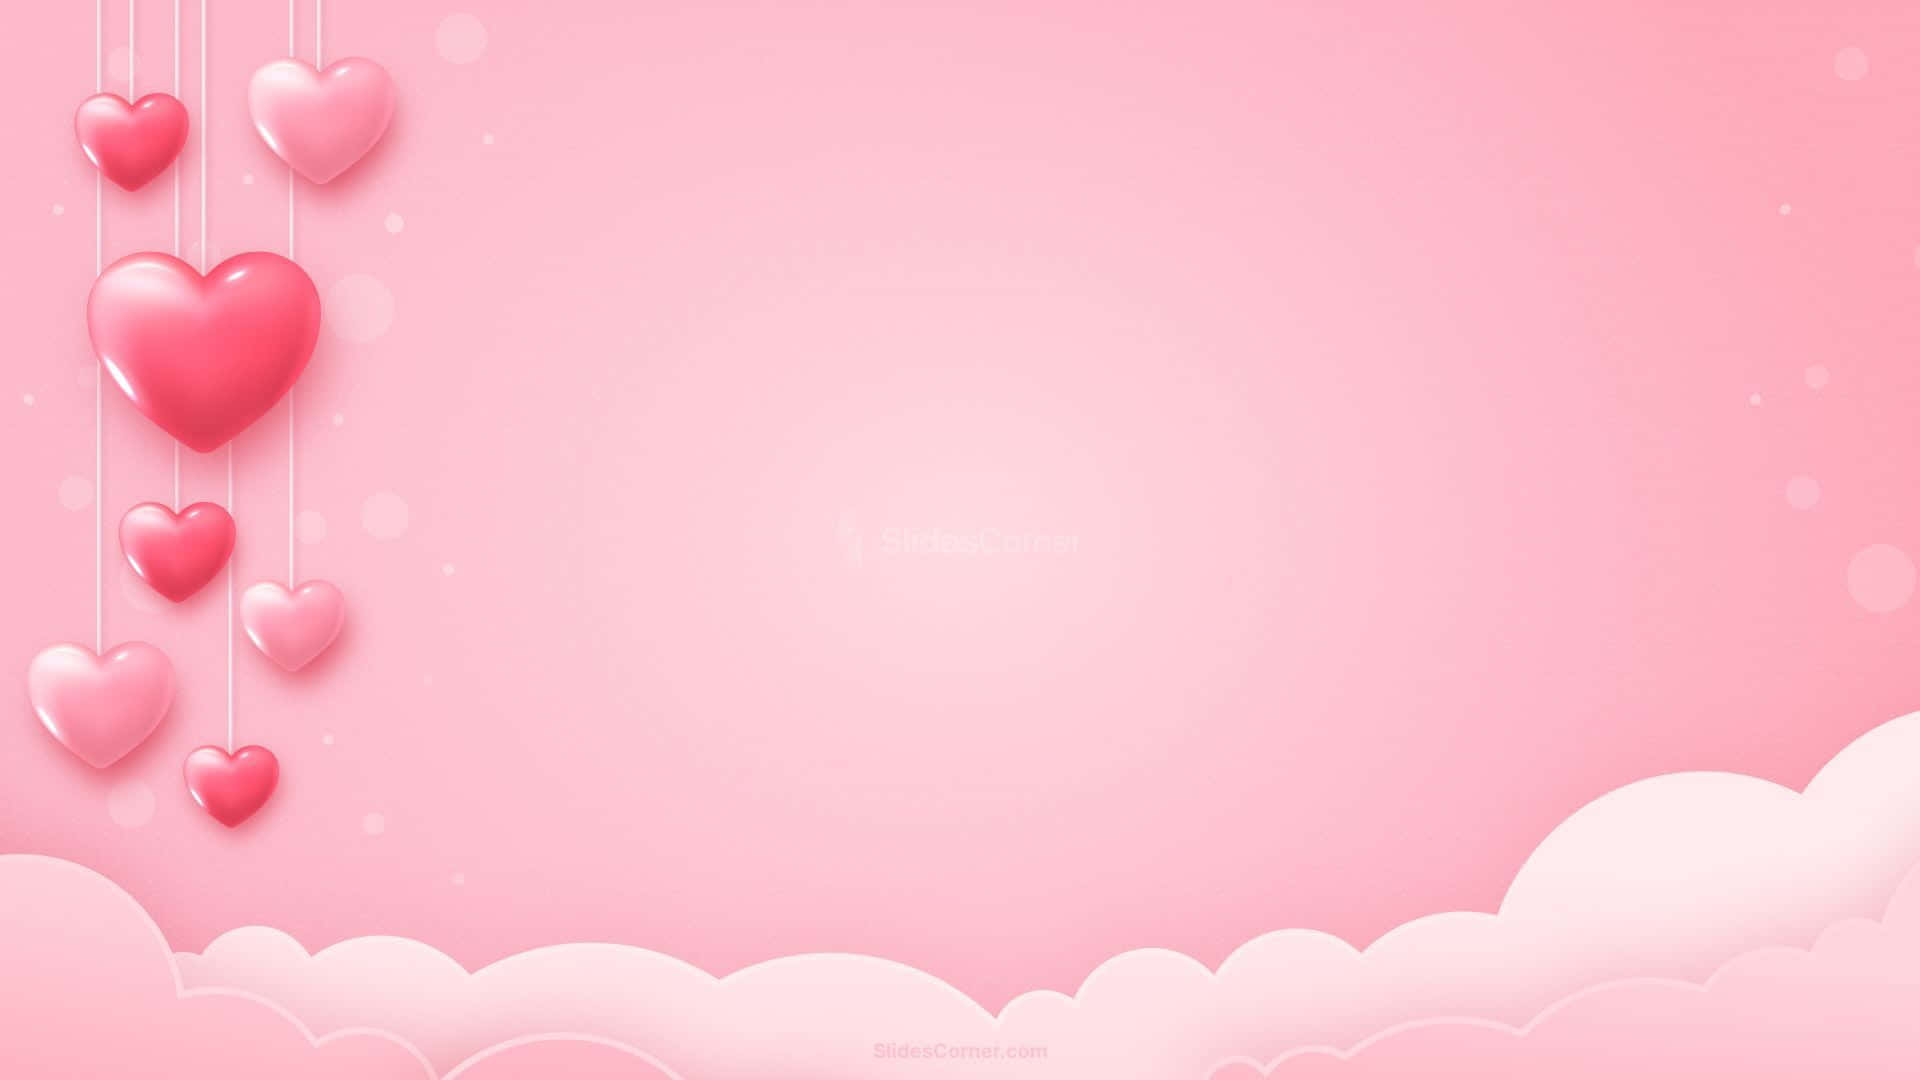 Hanging Hearts Pink Background Wallpaper